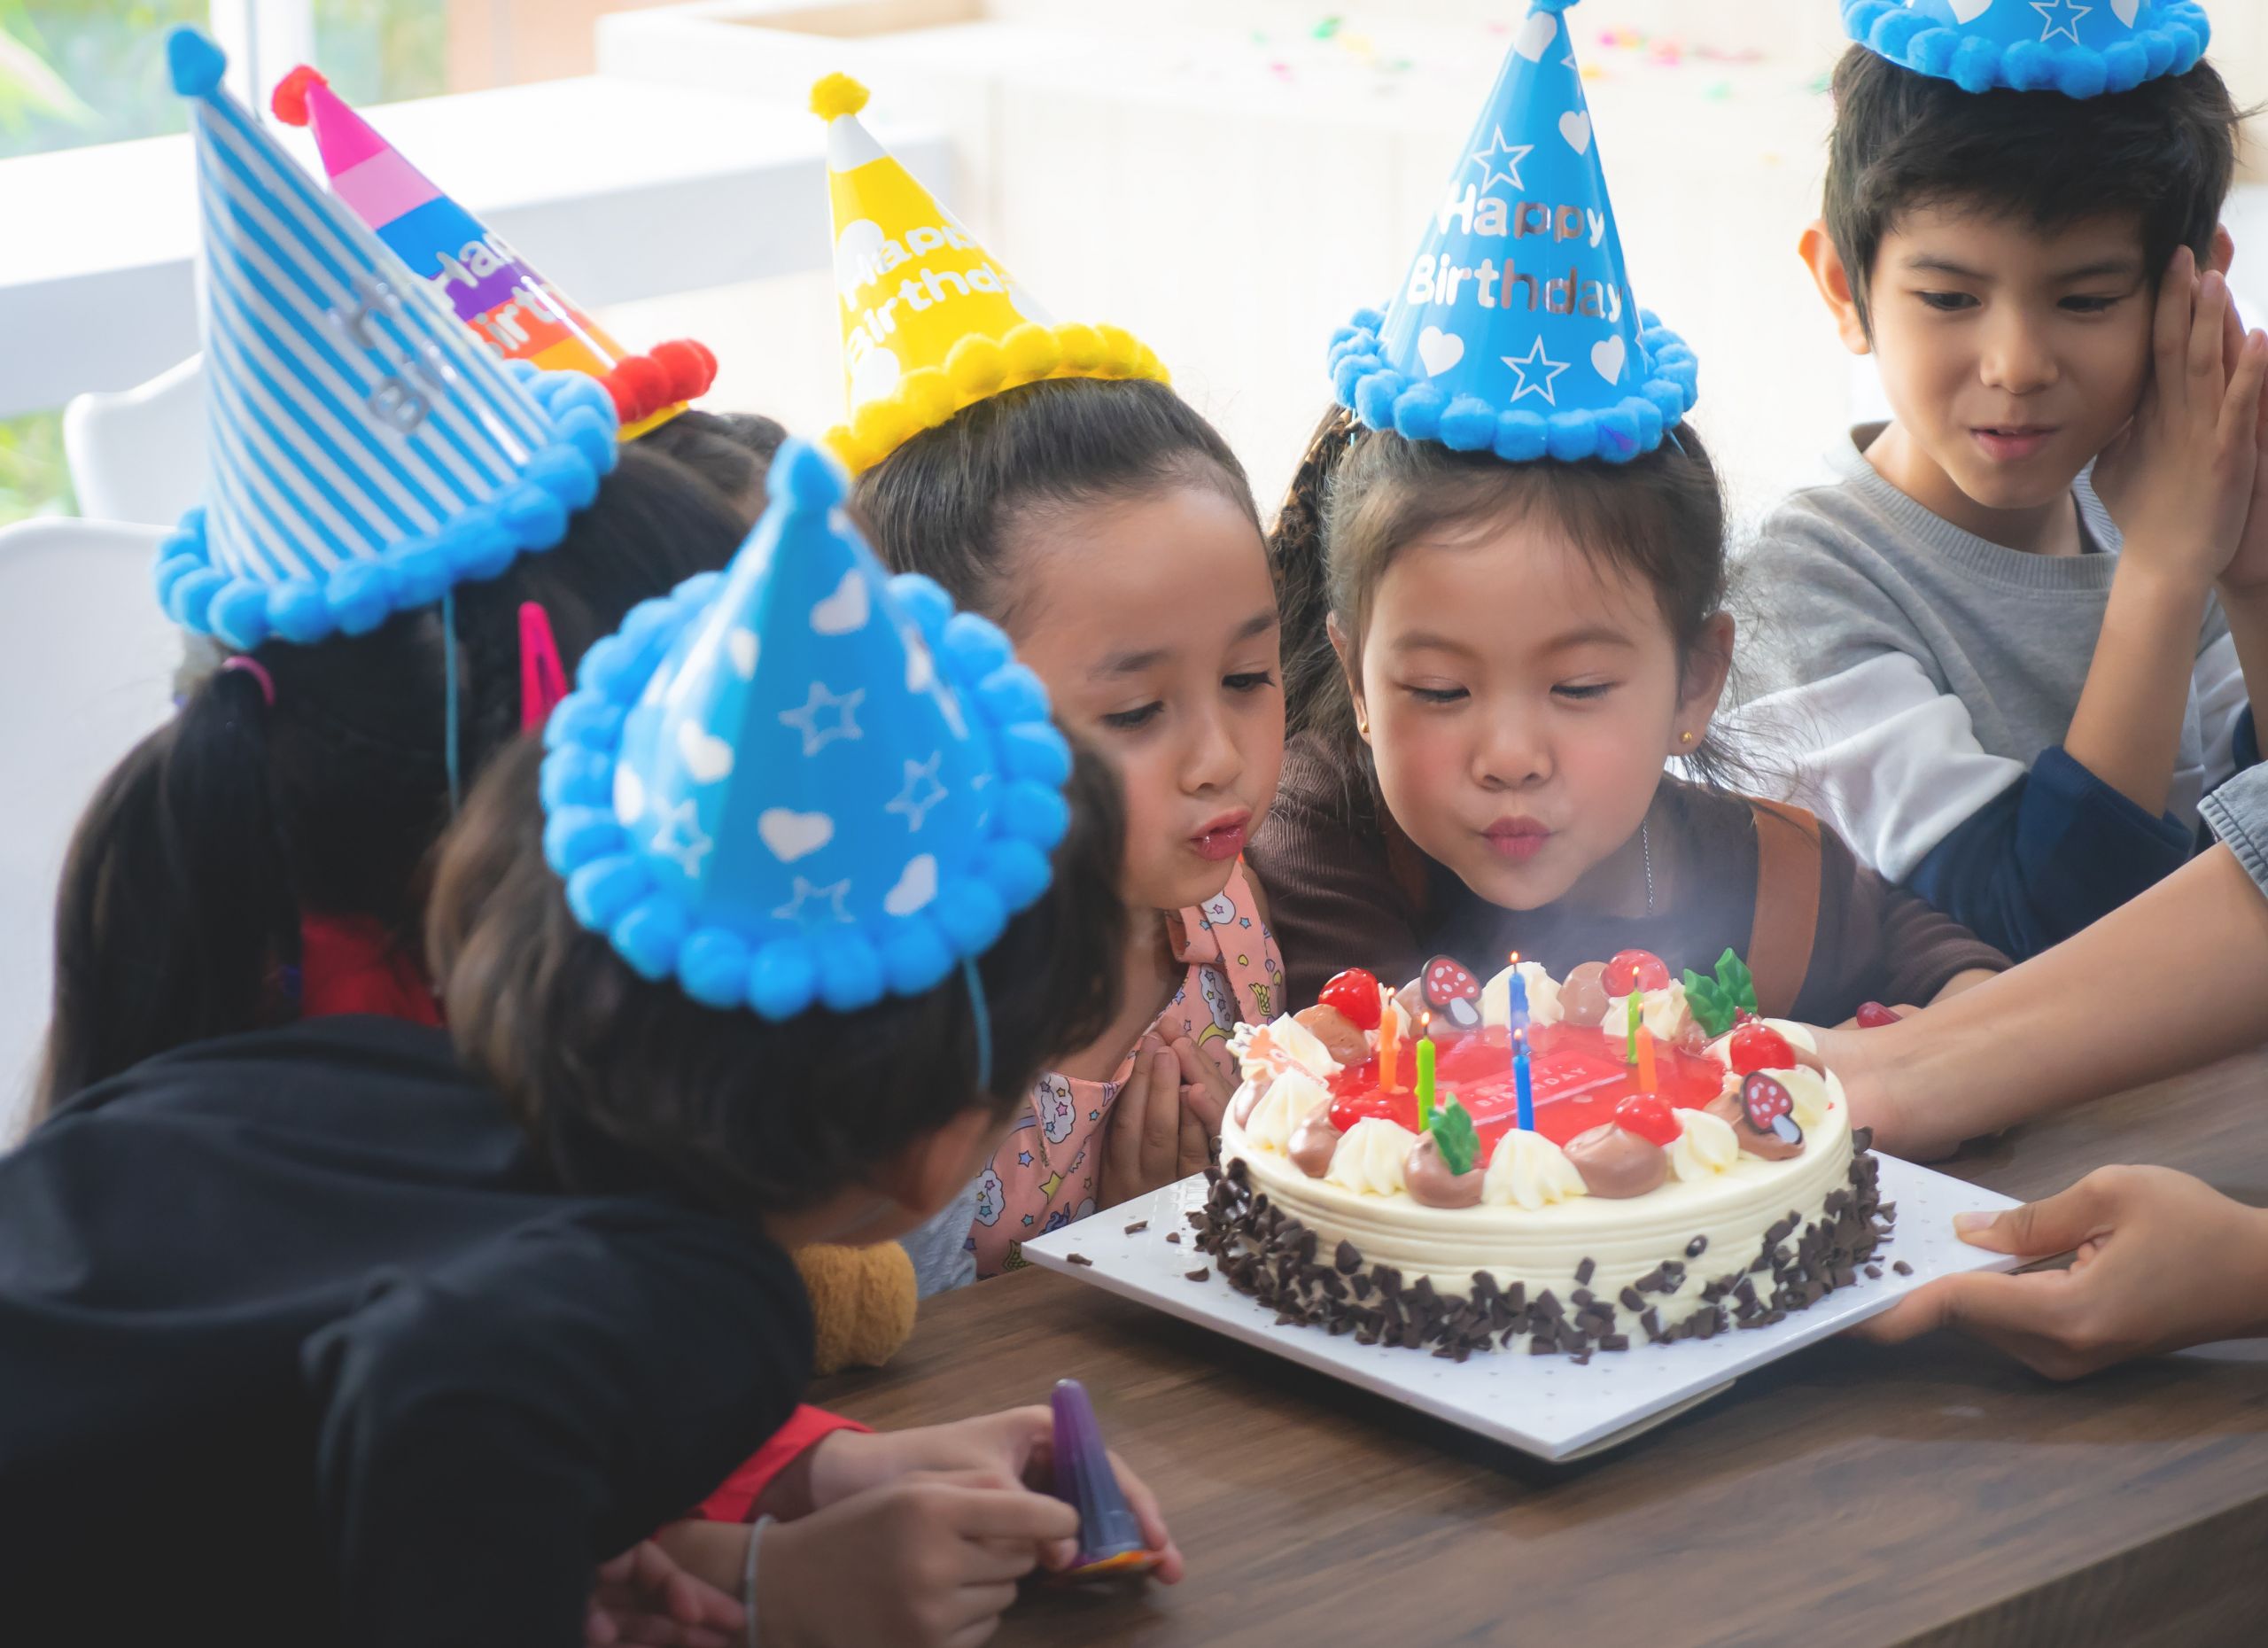 Places For A Birthday Party
 Top 16 Kids Birthday Party Places in the Bay Area